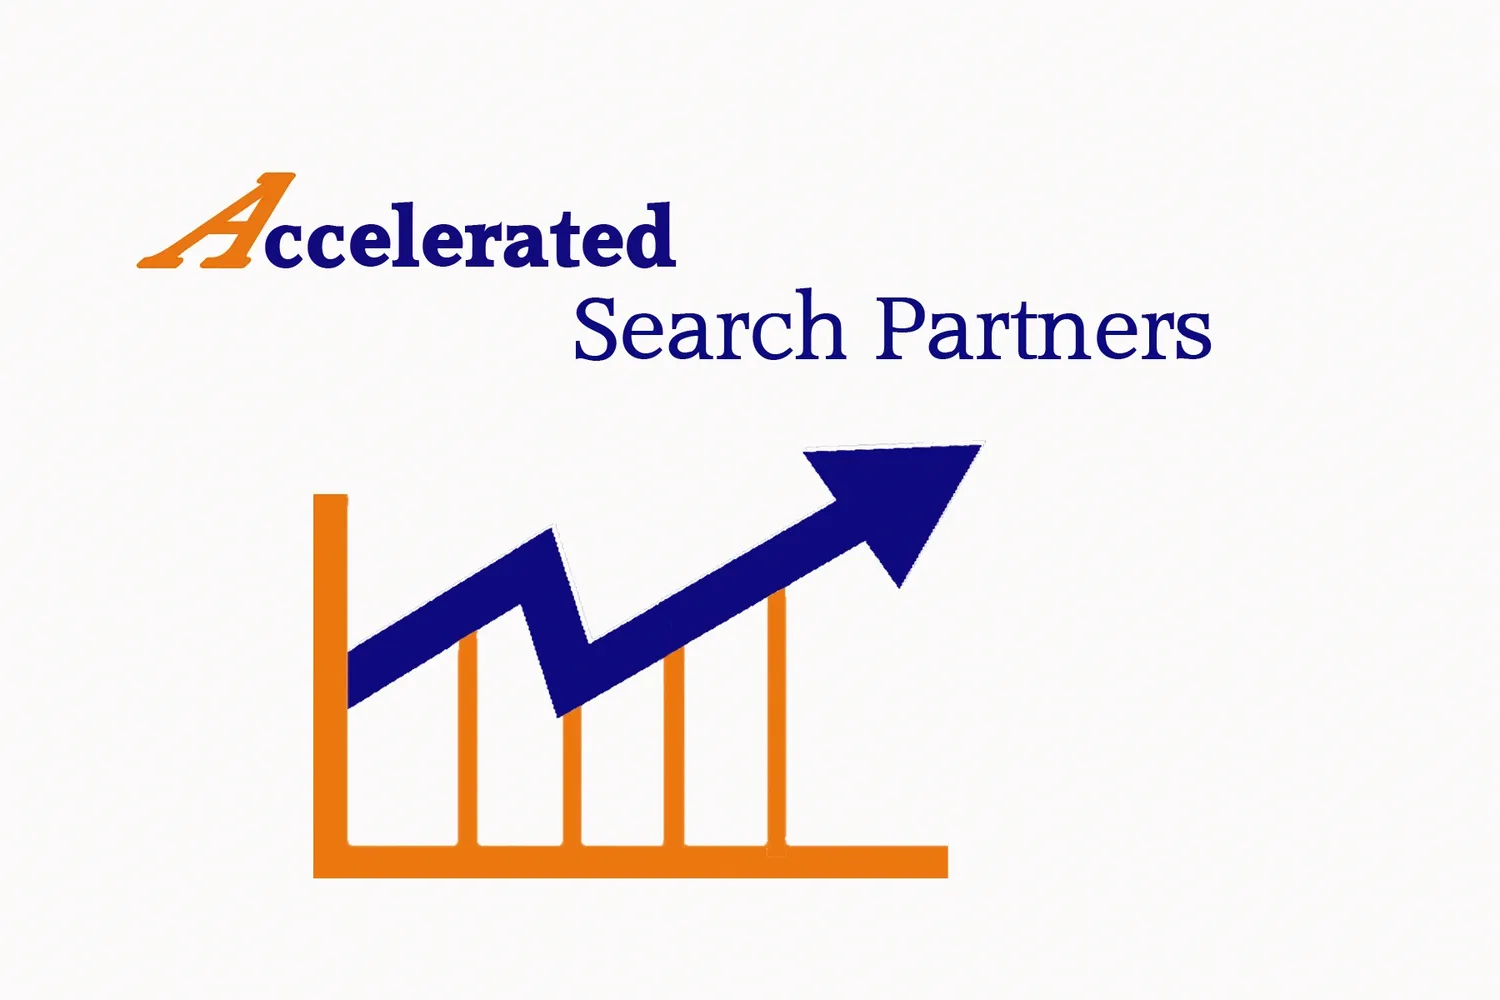 Accelerated Search Partners